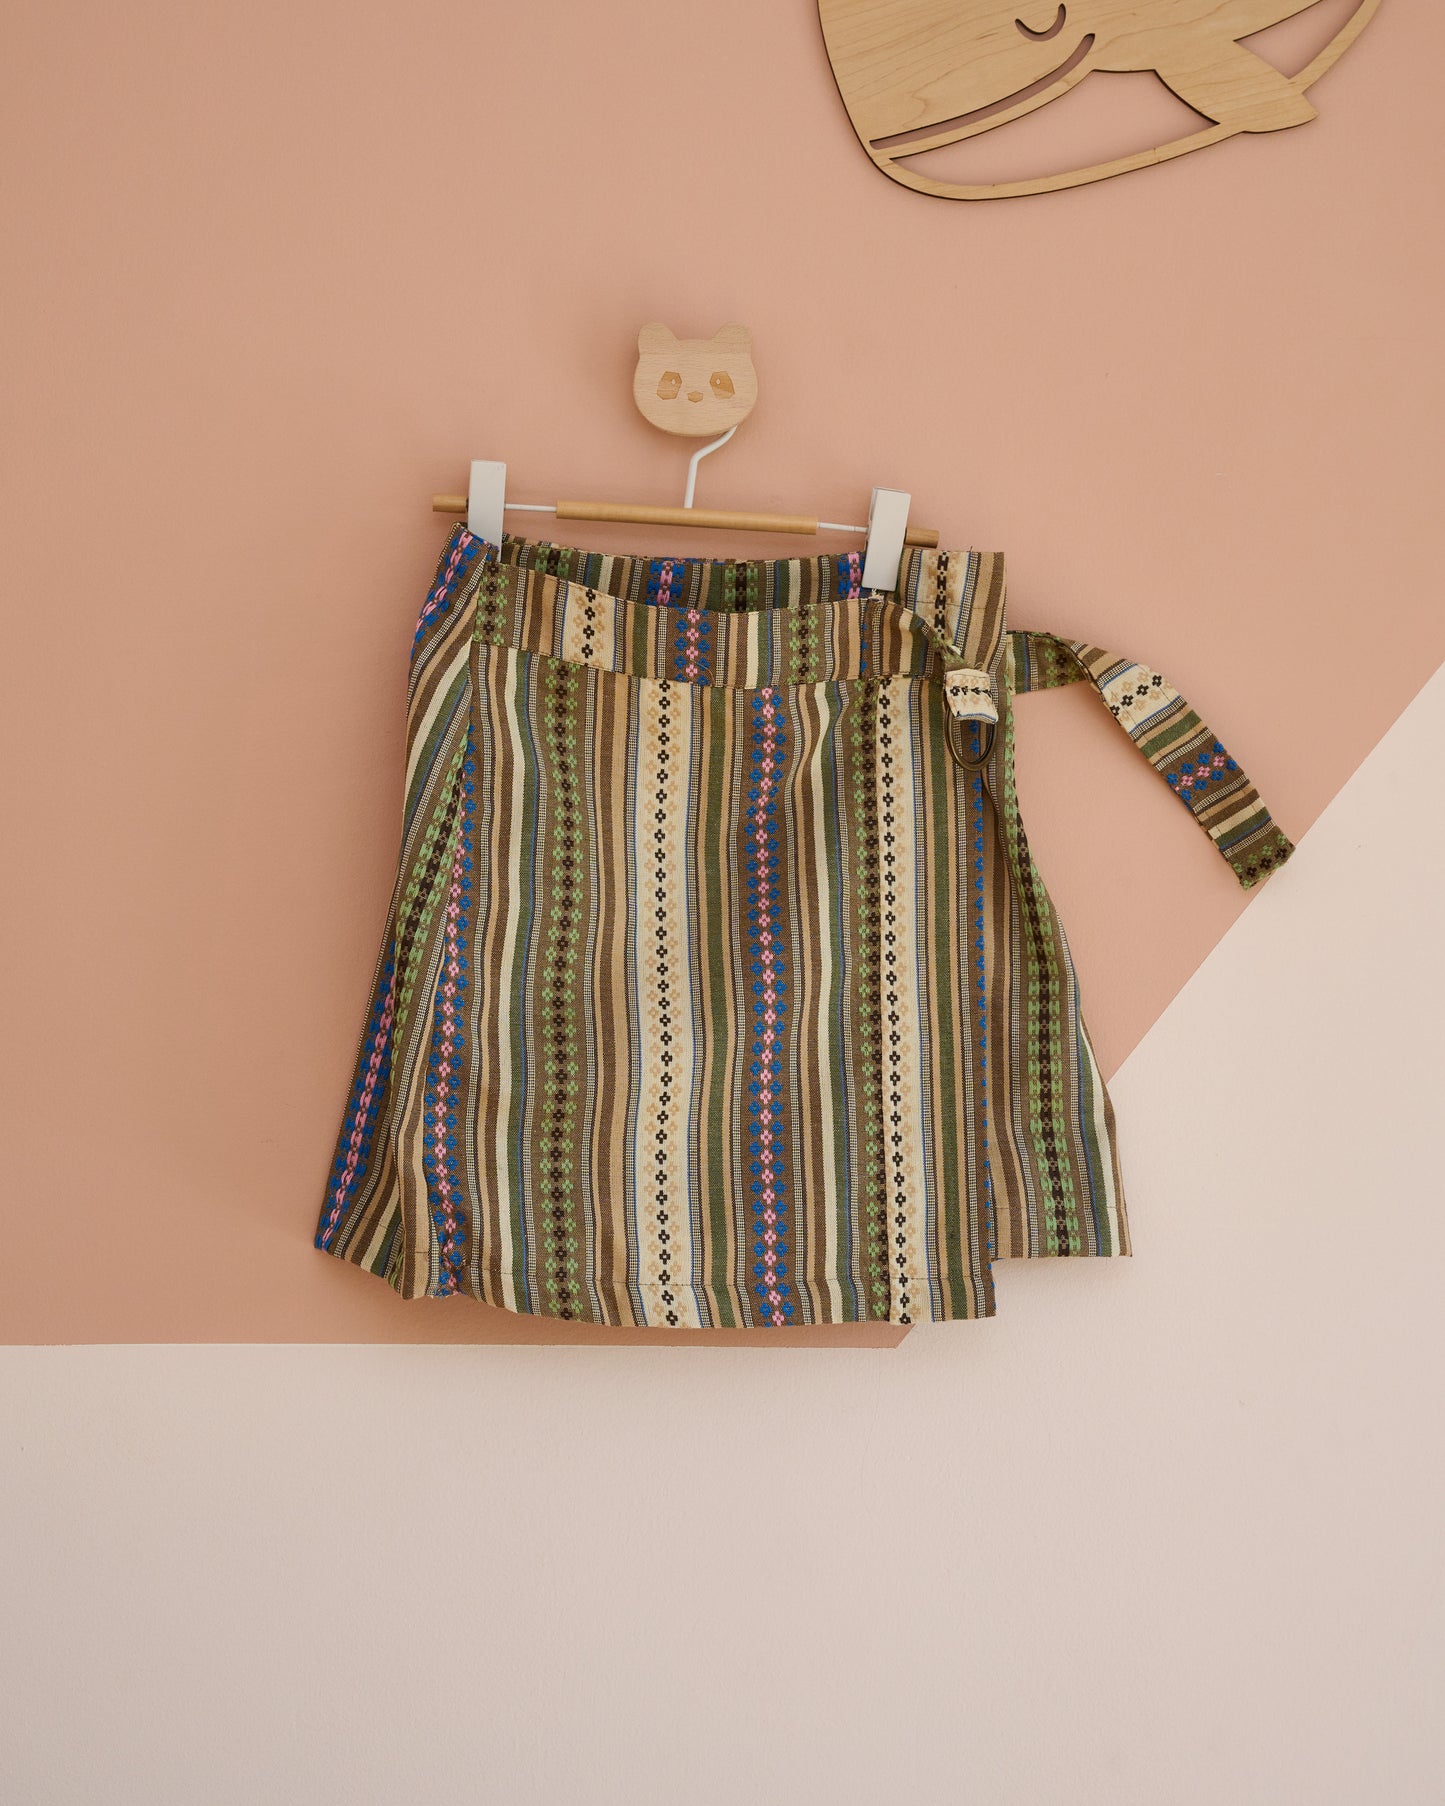 The Magical Forest Dungaree Skirt/Skort Mama and Me - CooCootales